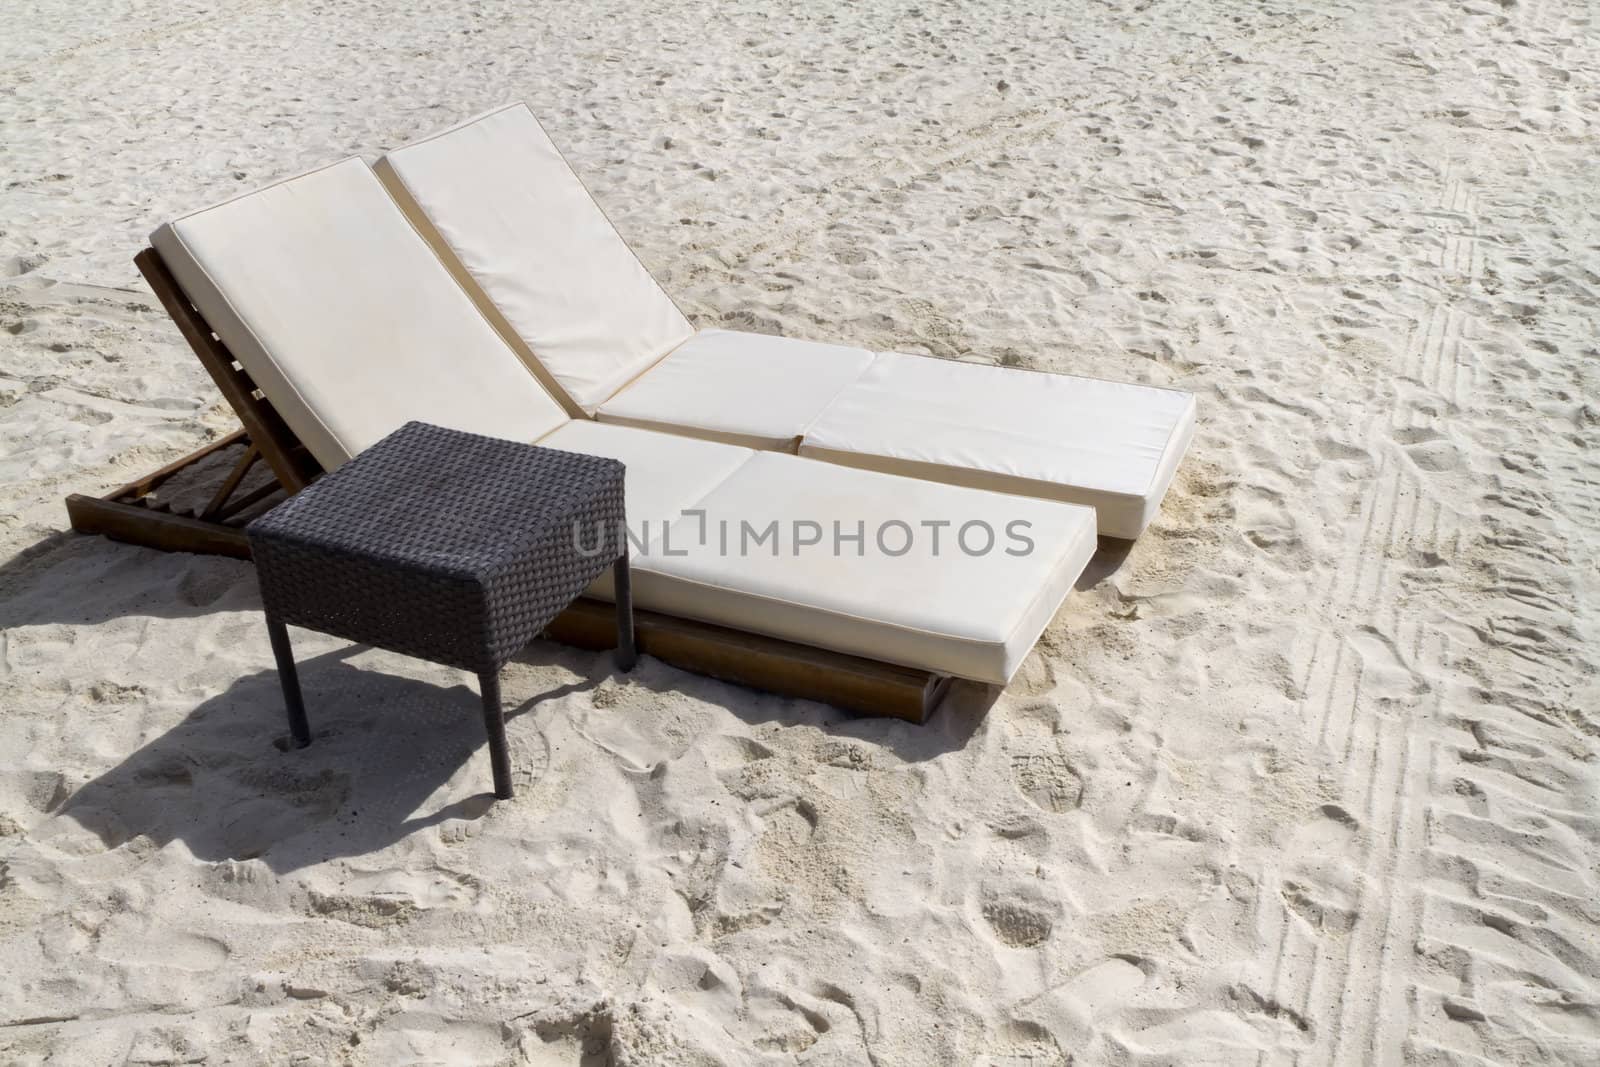 A pair of beach lounge chairs with table